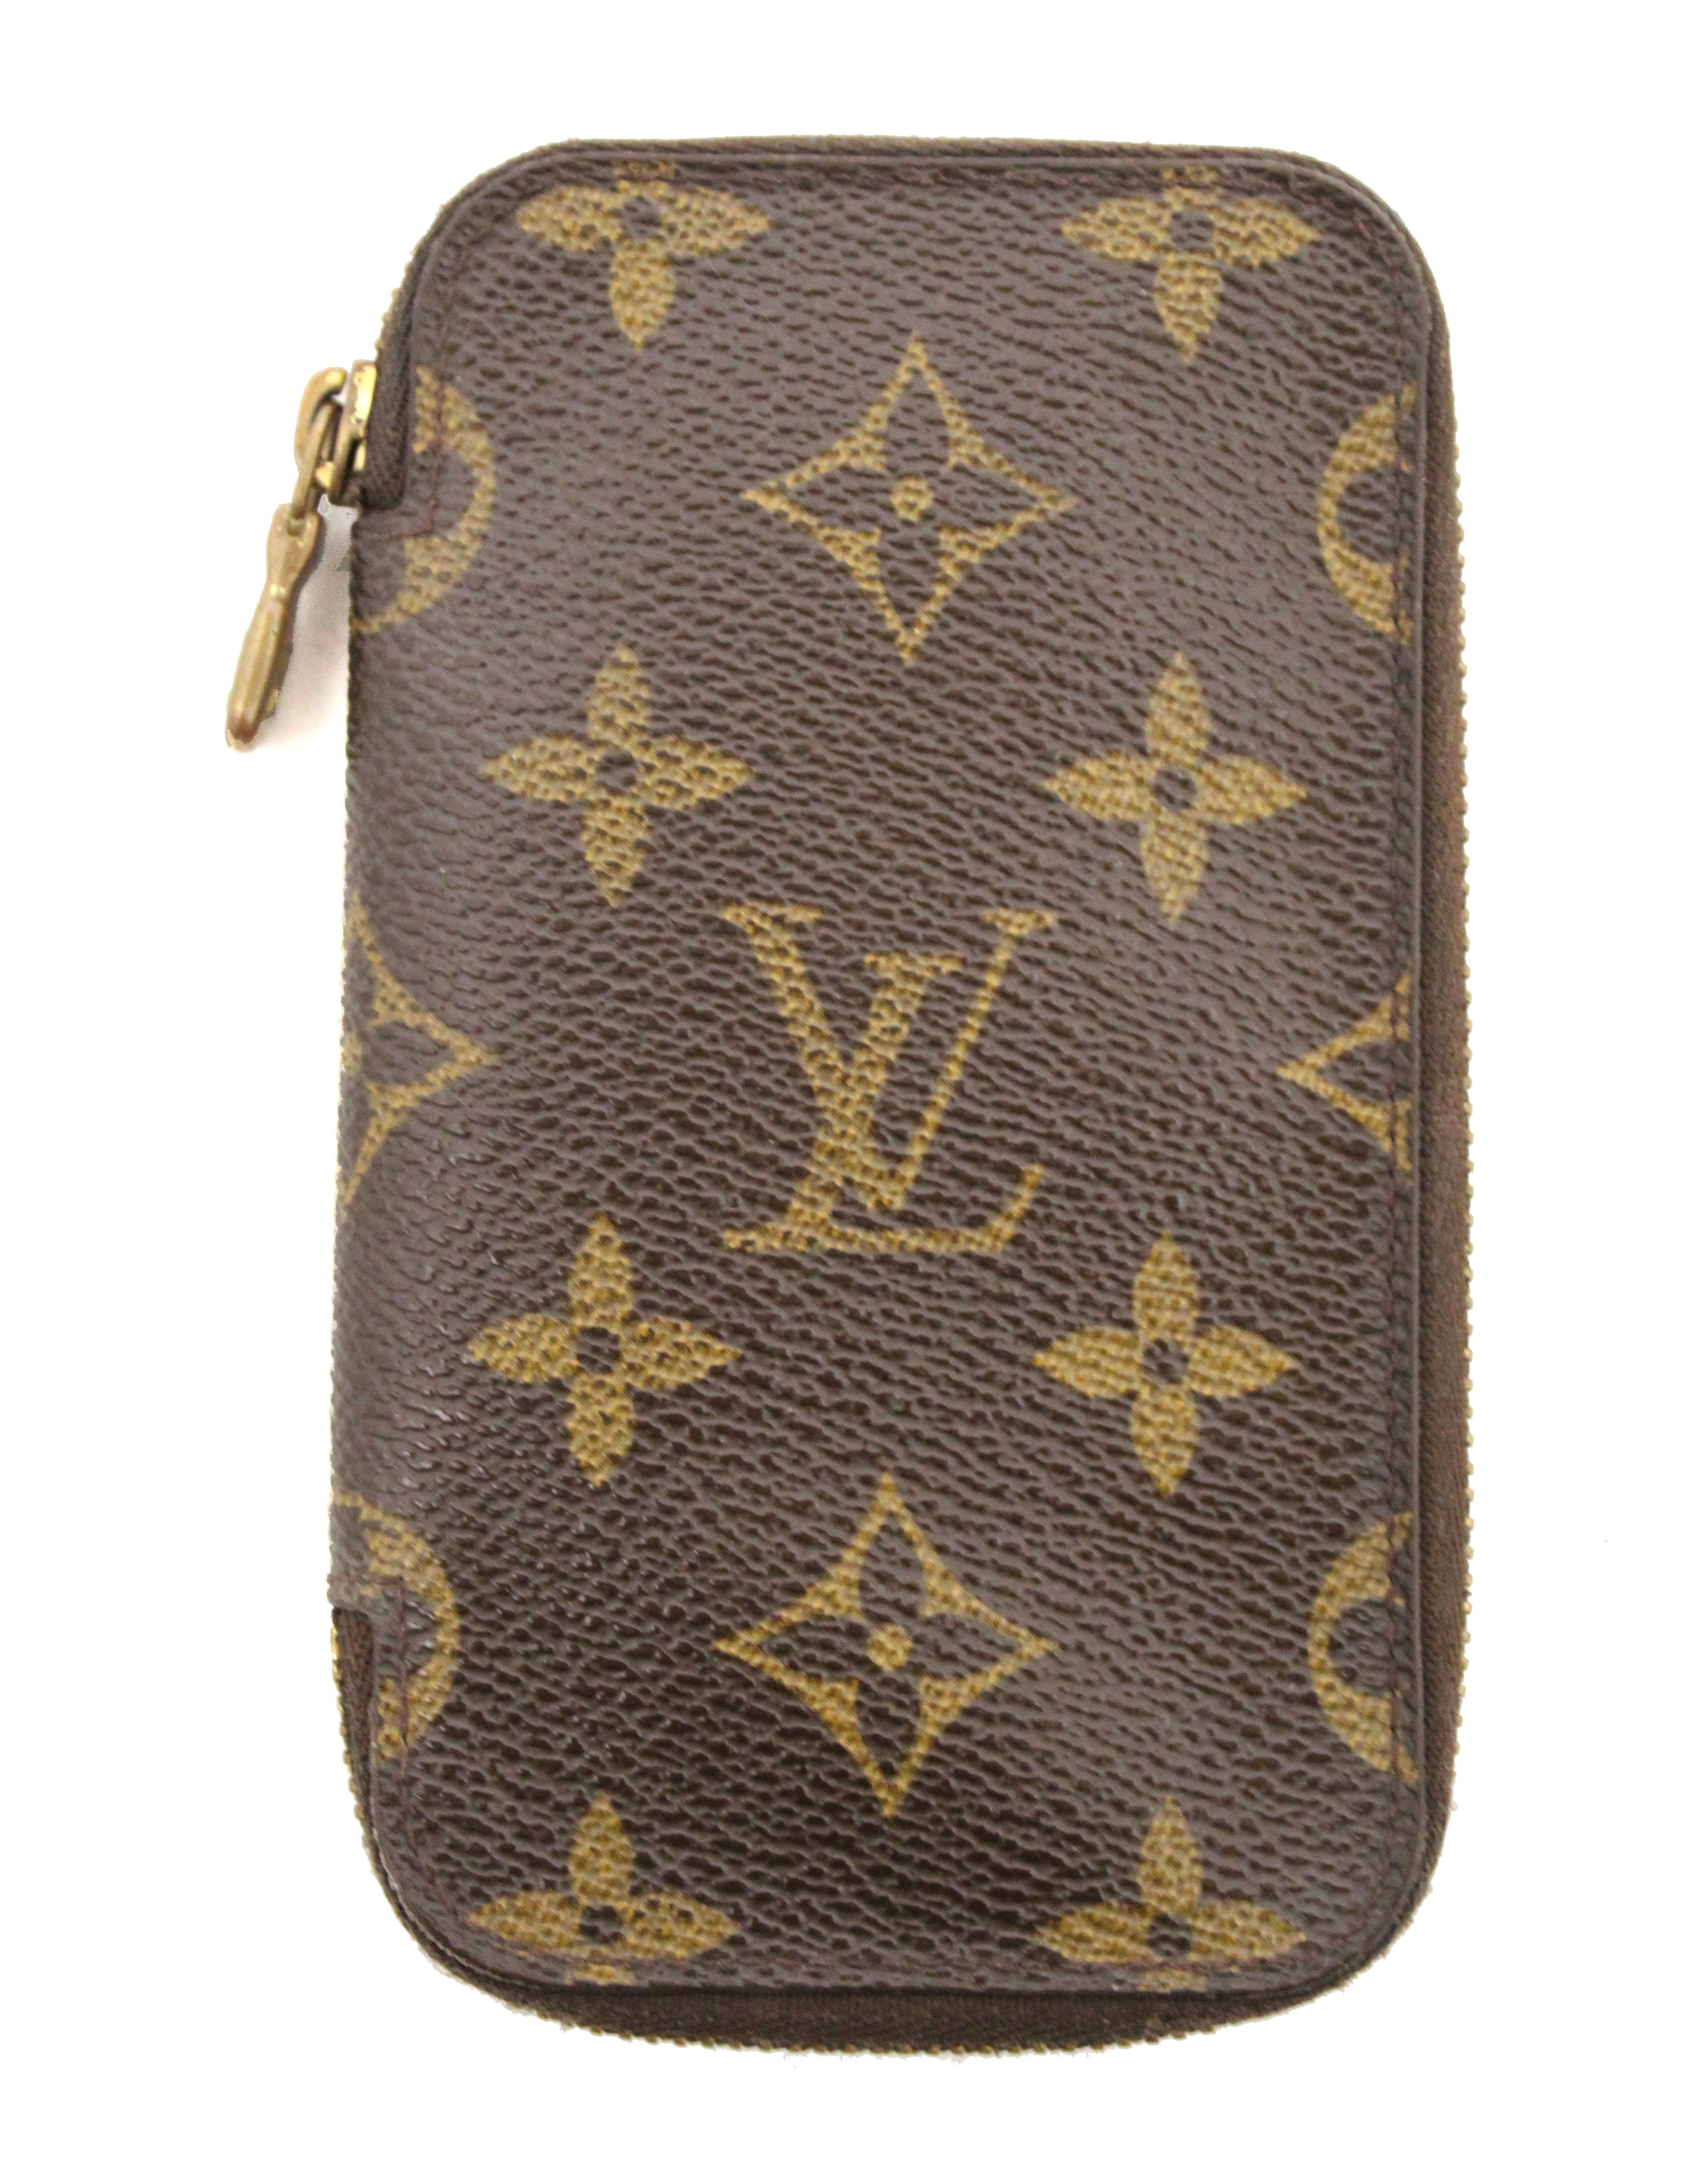 LOUIS VUITTON LOUIS VUITTON Multicles 4 key holder case M69517 Monogram GHW  Used M69517Product Code2106800482409BRAND OFF Online Store